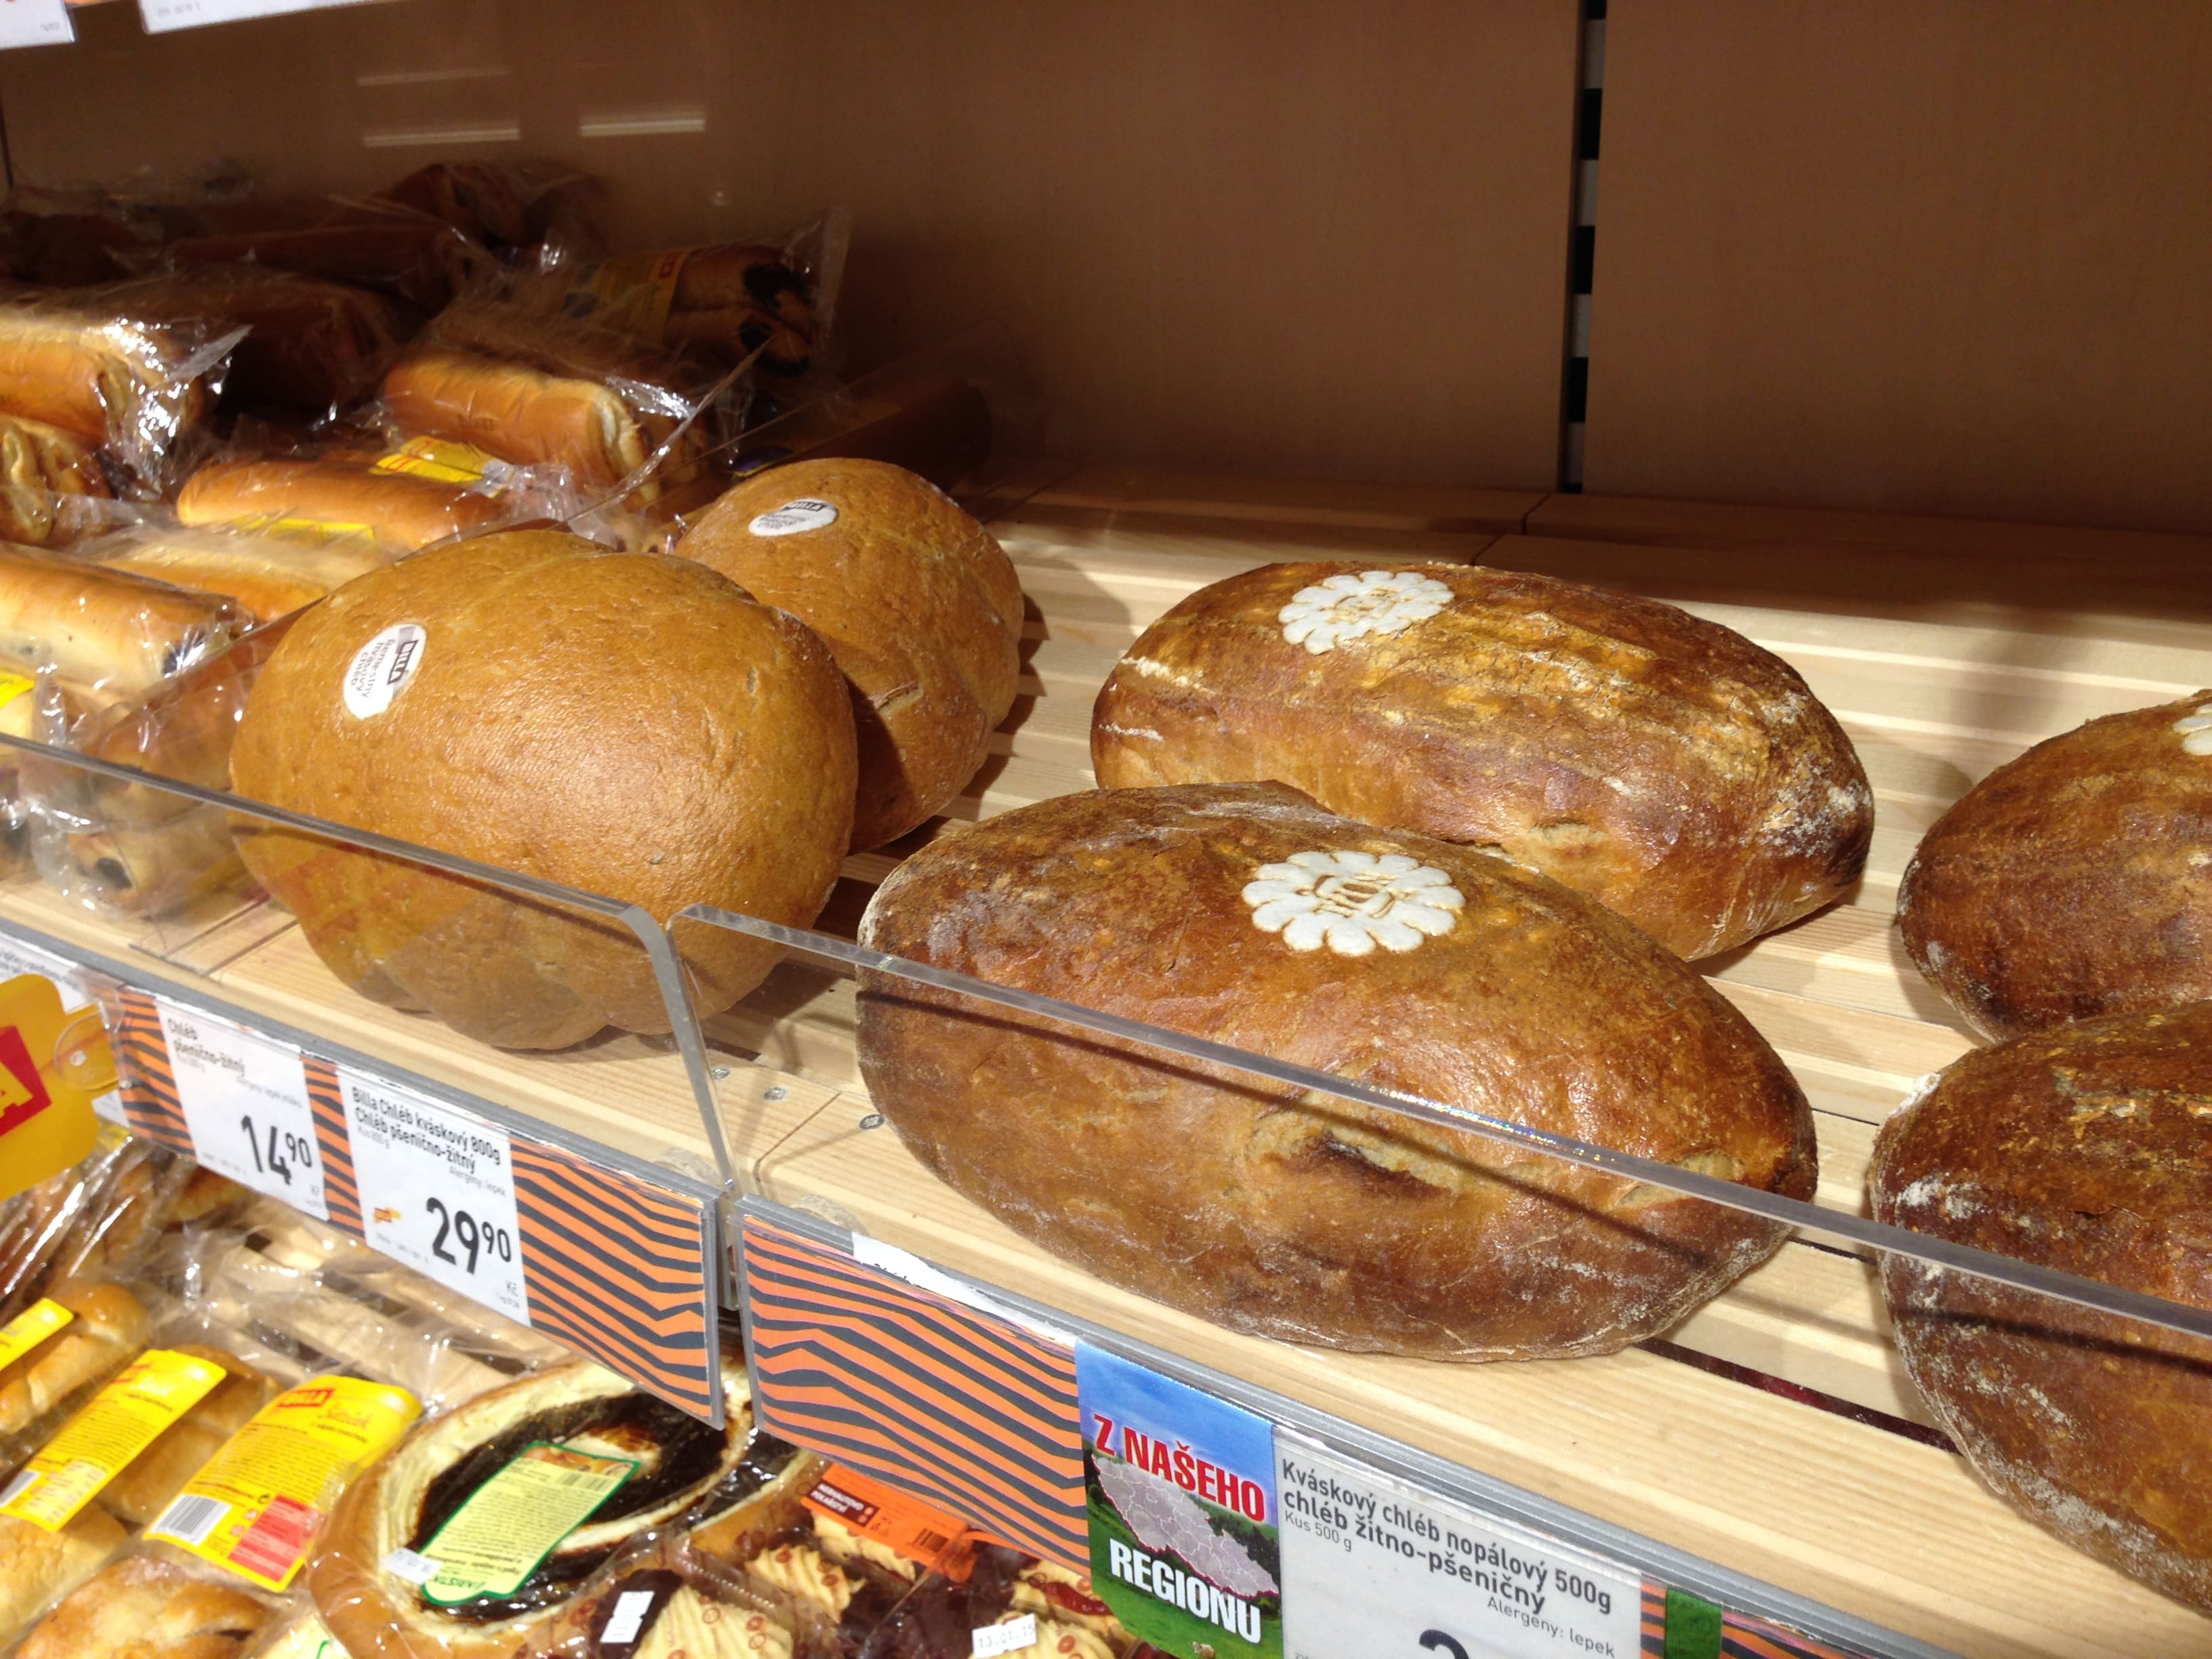 Shelf with loaves of bread marked with an edible label